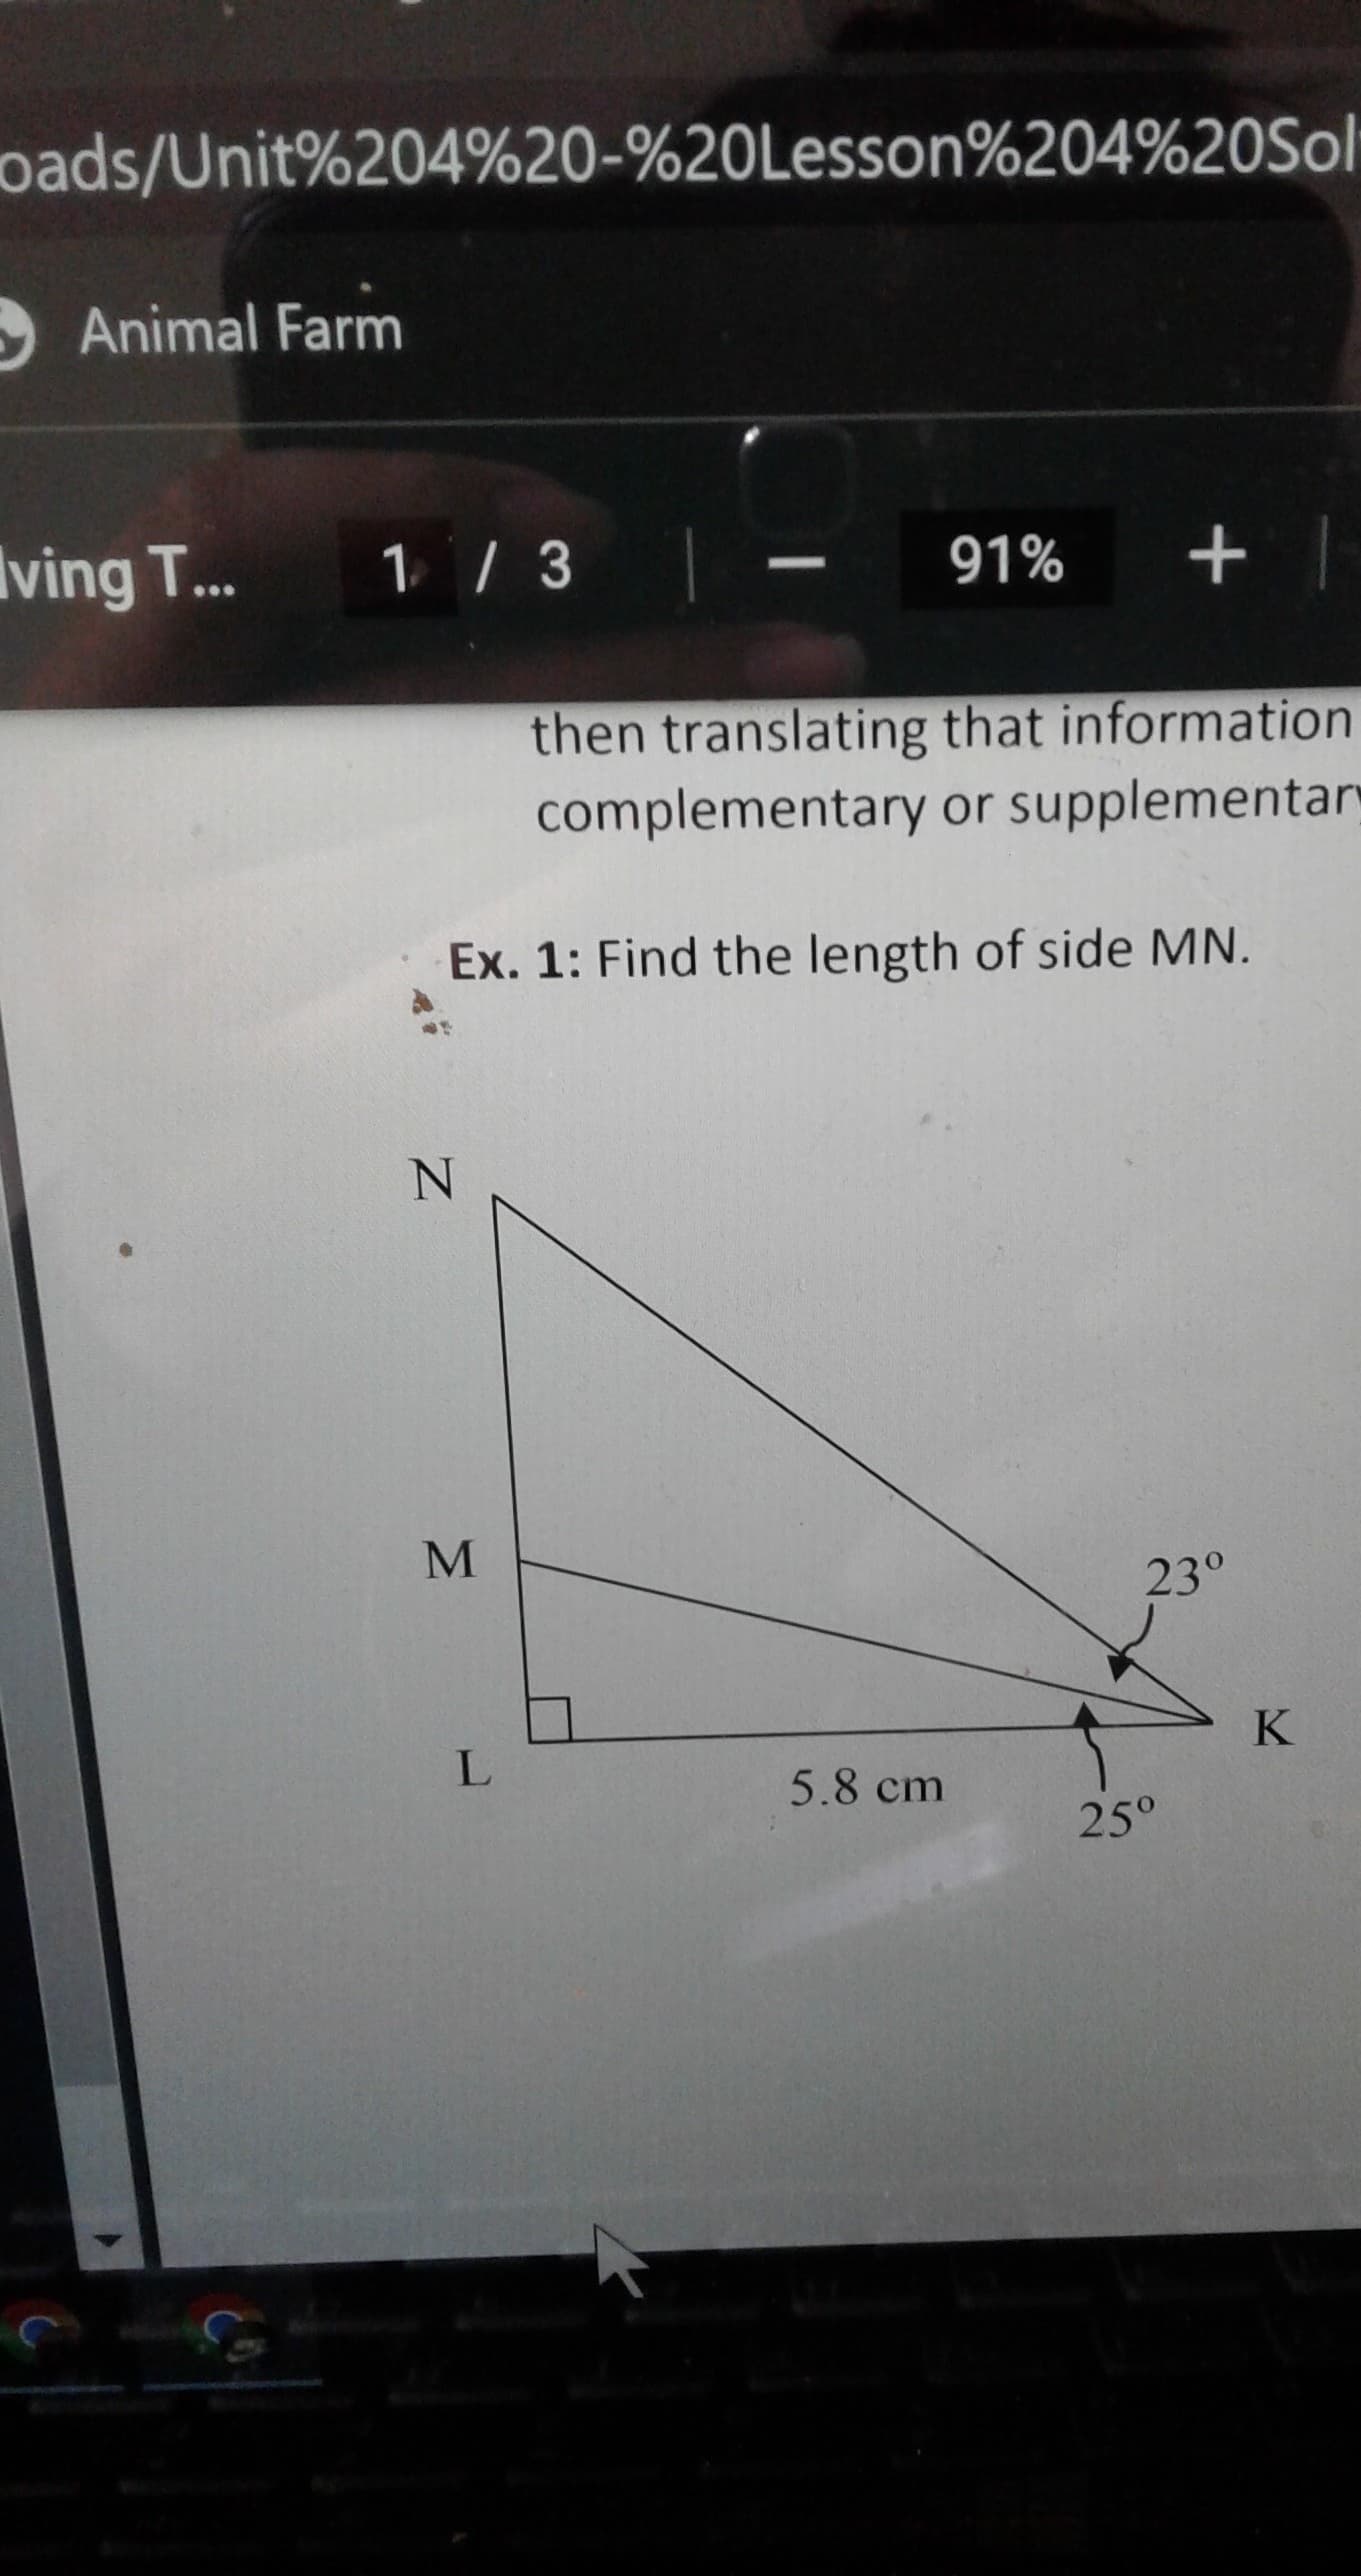 oads/Unit%204%20-%20Lesson%204%20Sol
Animal Farm
1/3
-
91% + |
then translating that information
complementary or supplementary
Ex. 1: Find the length of side MN.
N
23°
ving T...
M
L
5.8 cm
25°
K